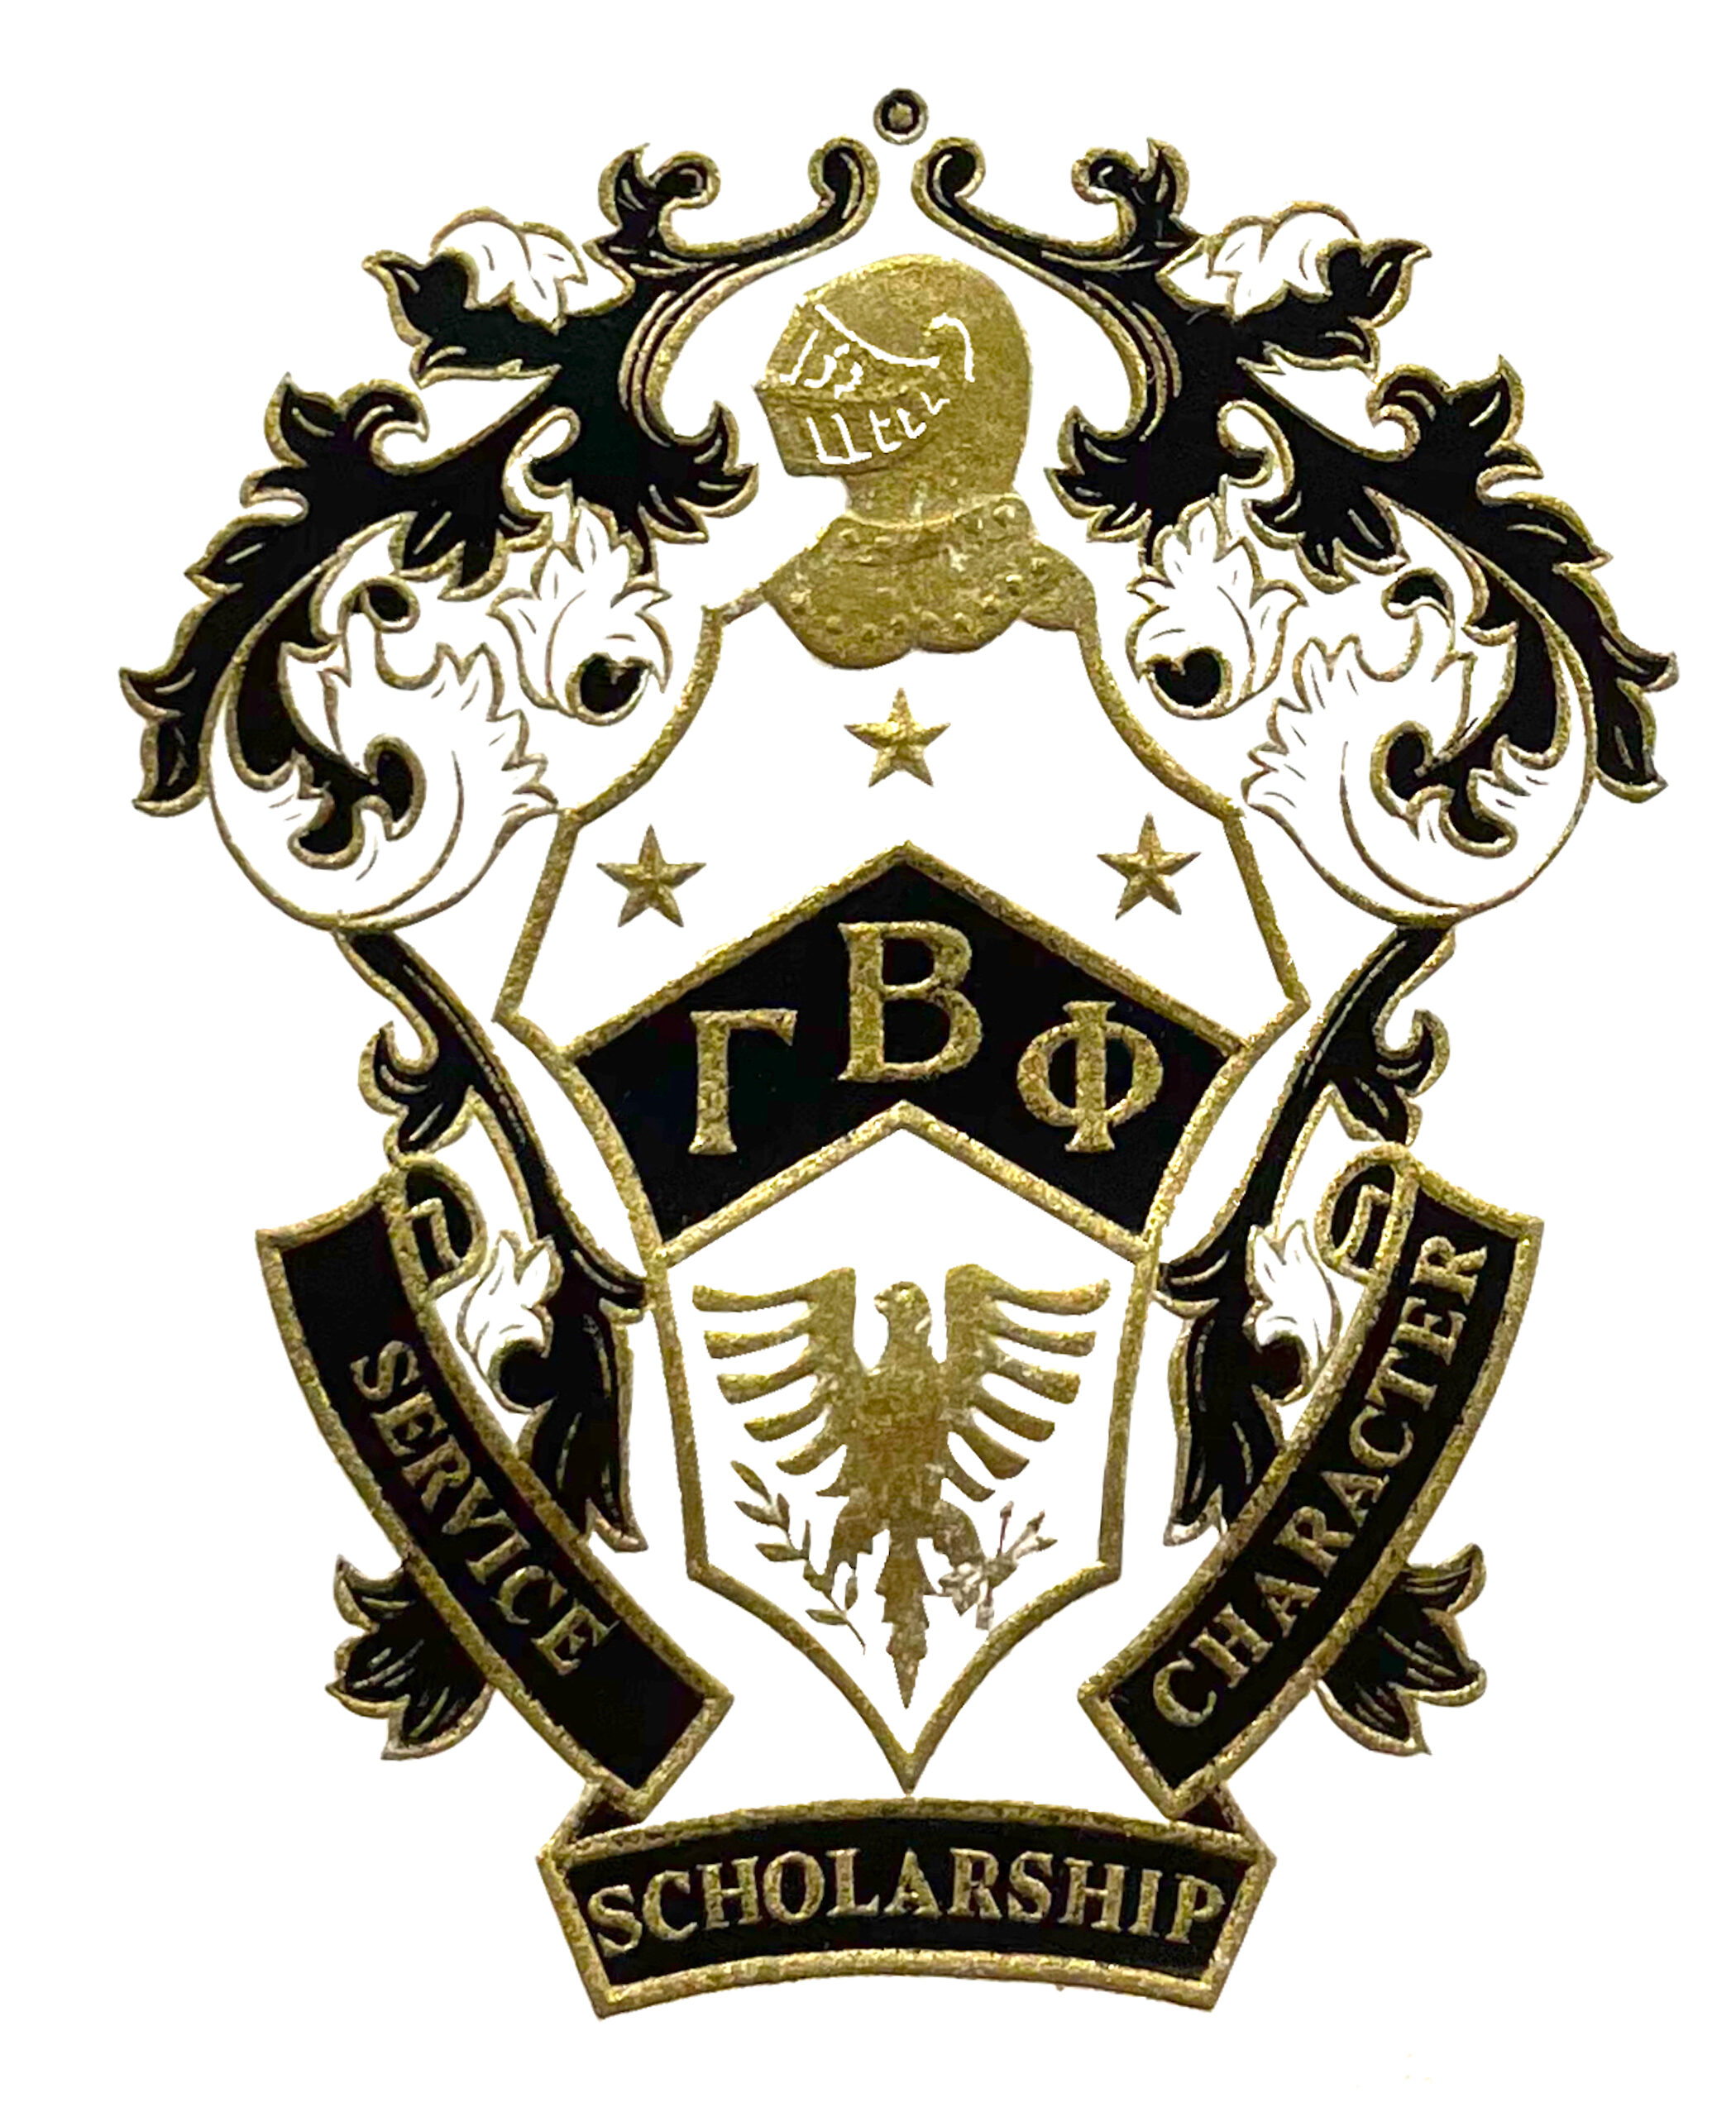 Fancy black and gold coat-of-arms logo of Gamma Beta Phi national college honor society.